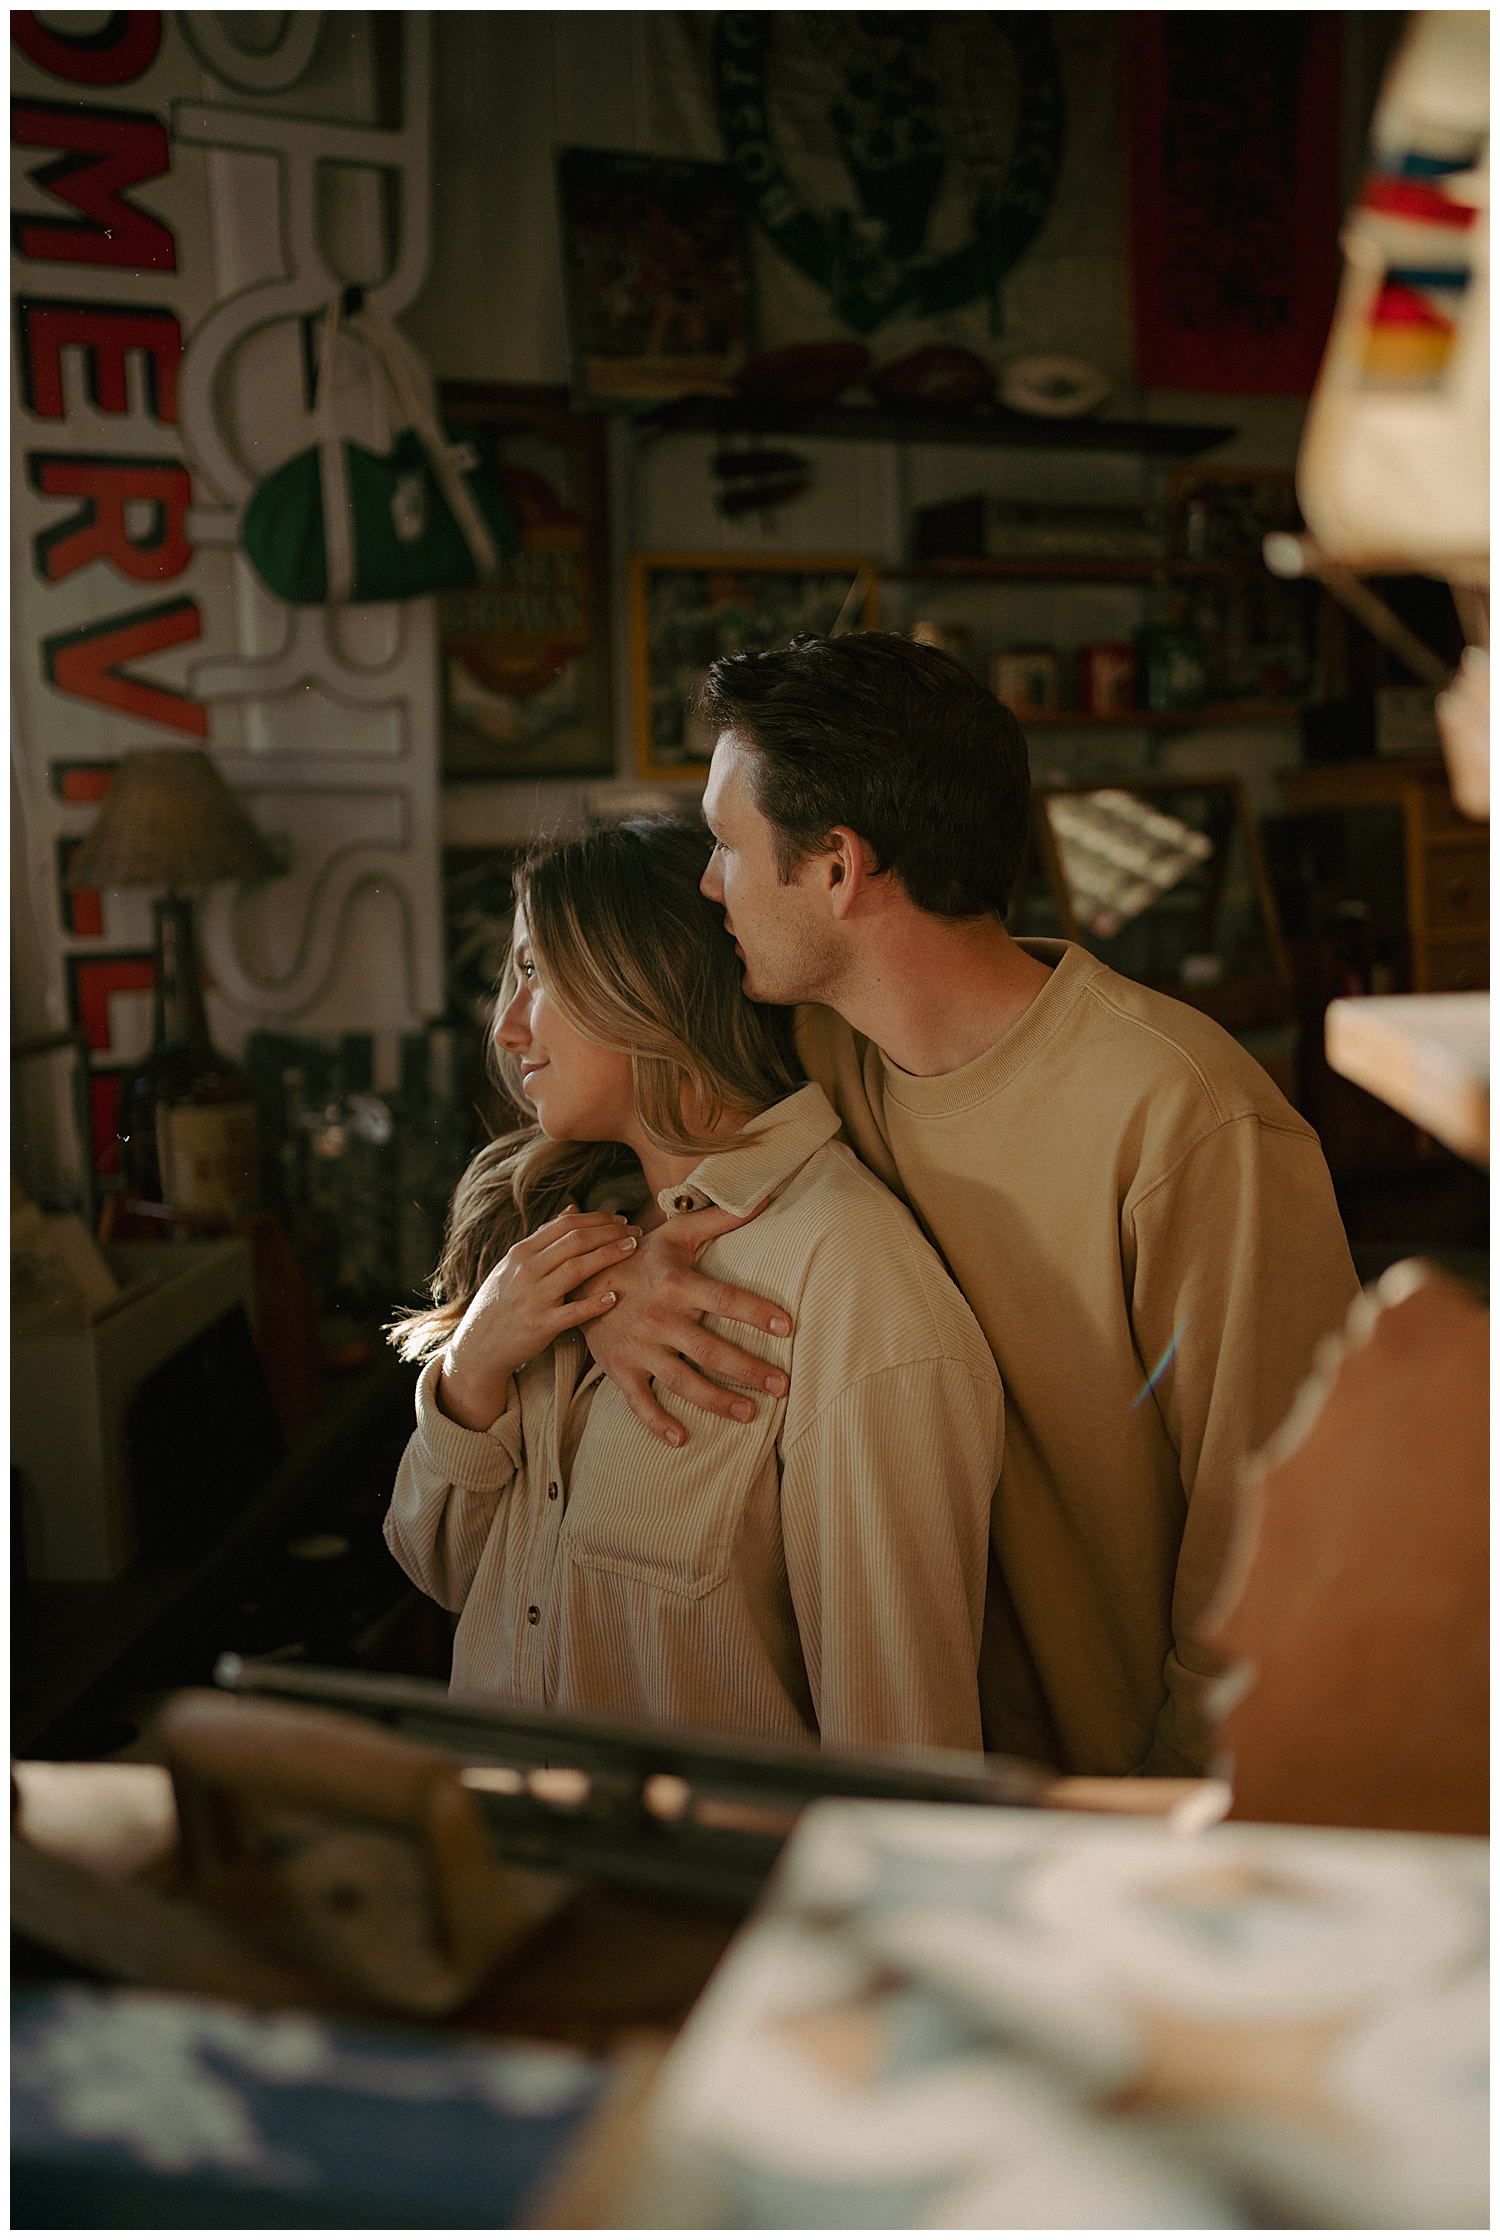 The couple sharing a hug in the antique store window light